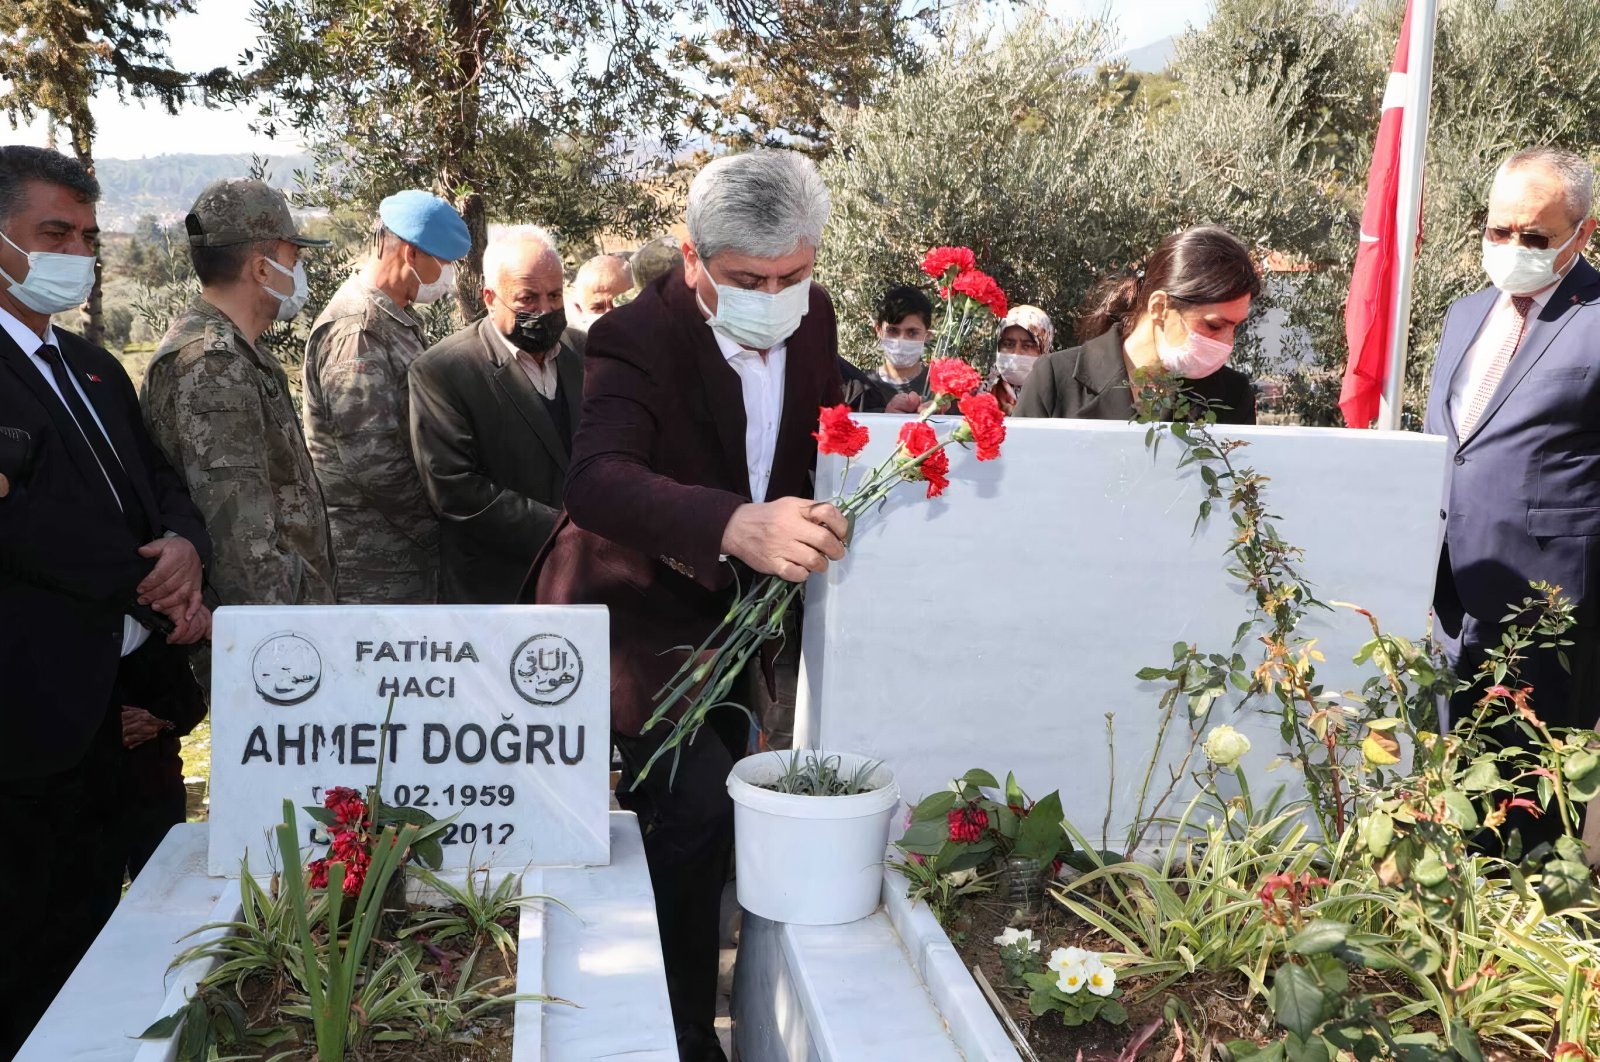 Hatay Governor Rahmi Doğan is seen leaving flowers on the grave of one of the 34 Turkish soldiers that lost their lives during an attack in Syria's Idlib, Hatay, Turkey, Feb. 27, 2021 (AA Photo)